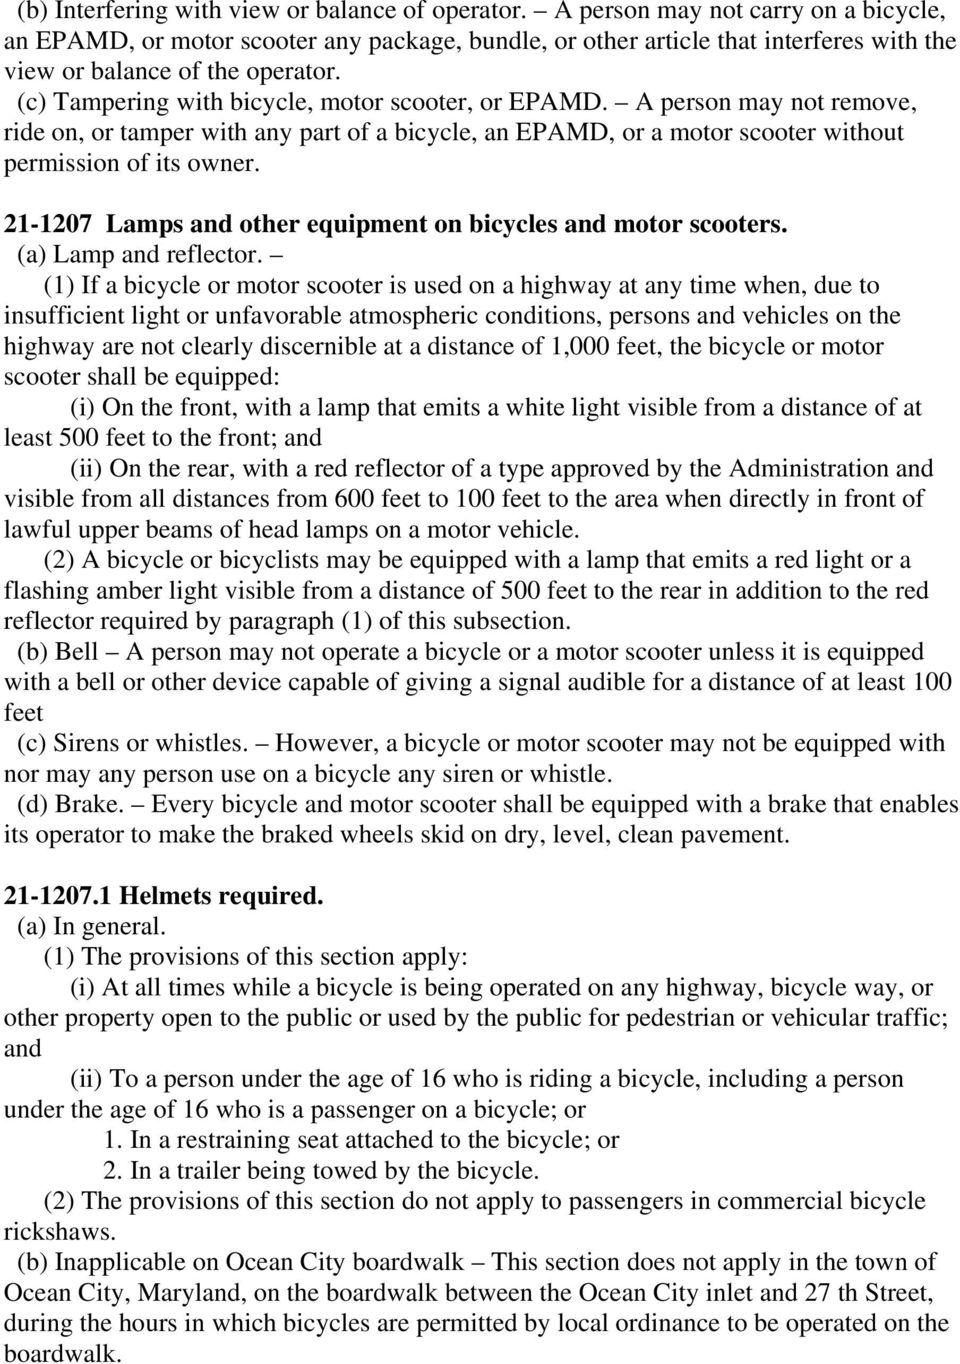 (c) Tampering with bicycle, motor scooter, or EPAMD. A person may not remove, ride on, or tamper with any part of a bicycle, an EPAMD, or a motor scooter without permission of its owner.